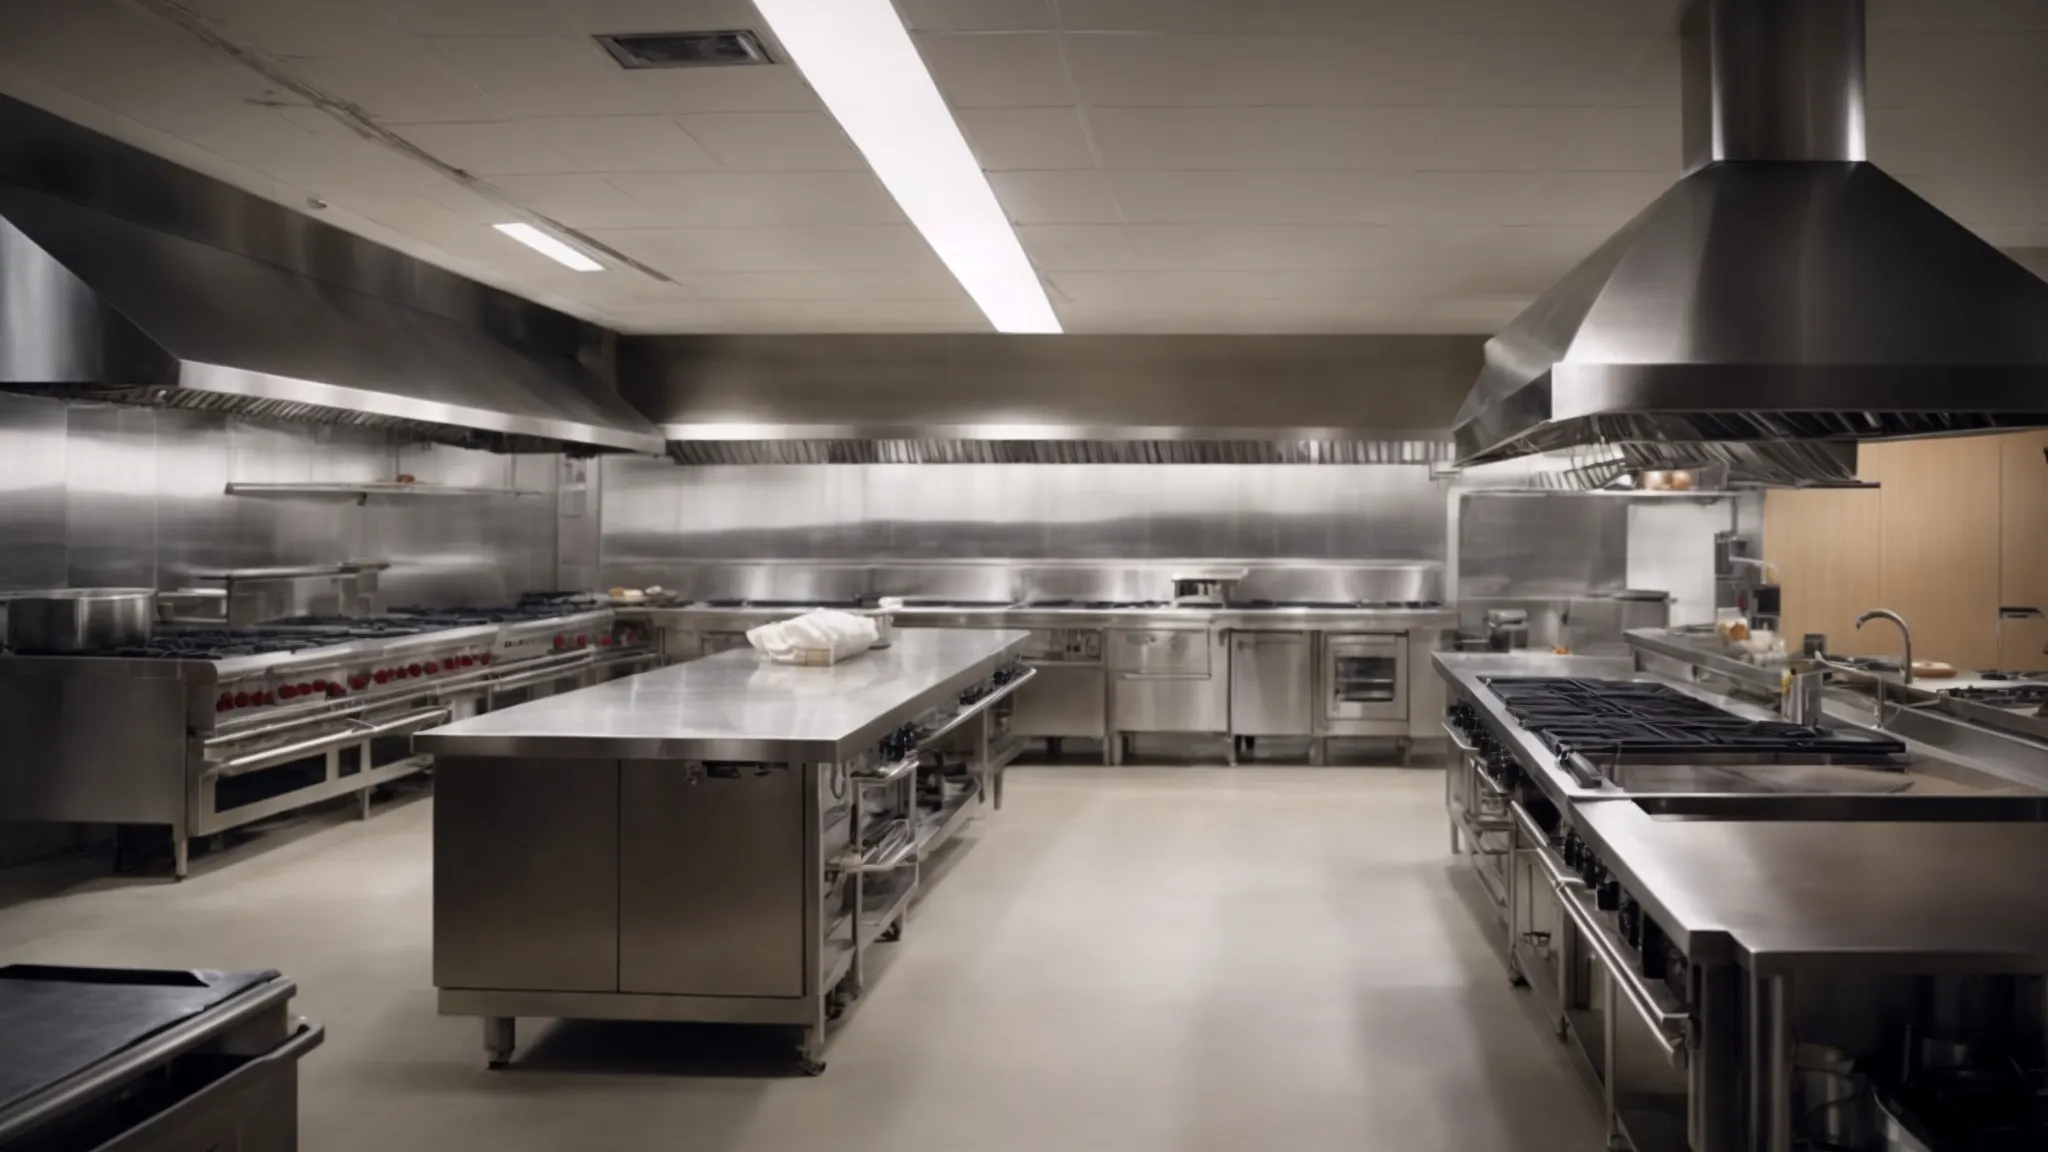 a commercial kitchen suspended in the early morning calm, with all cooking appliances off and surfaces cleared, ready for the hood cleaning team's arrival.